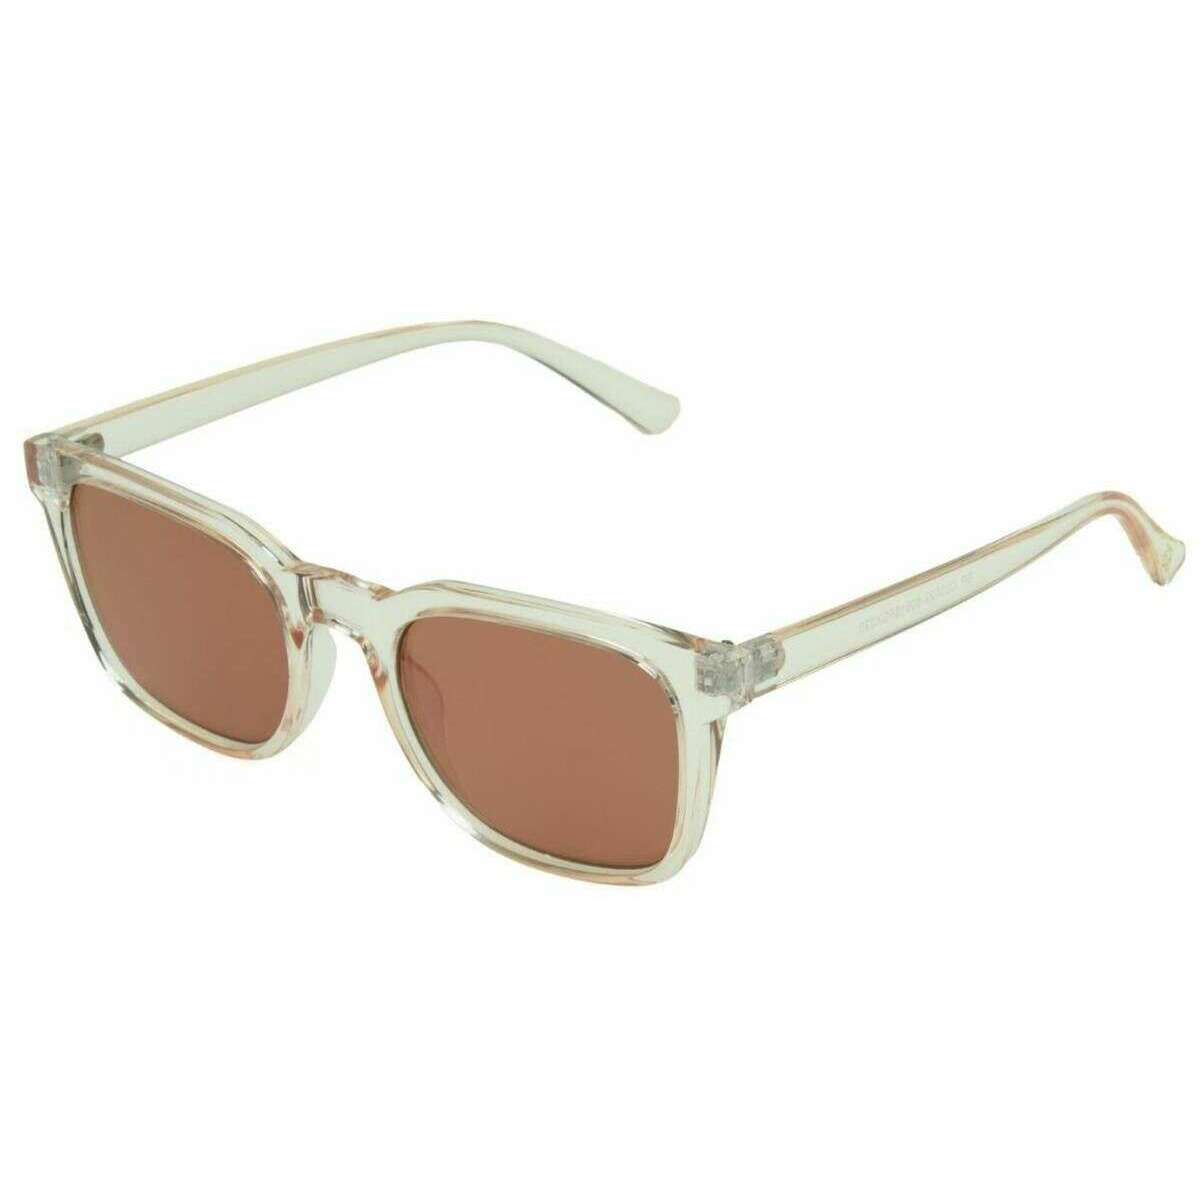 Foster Grant Square Sunglasses - Shiny Pale Crystal